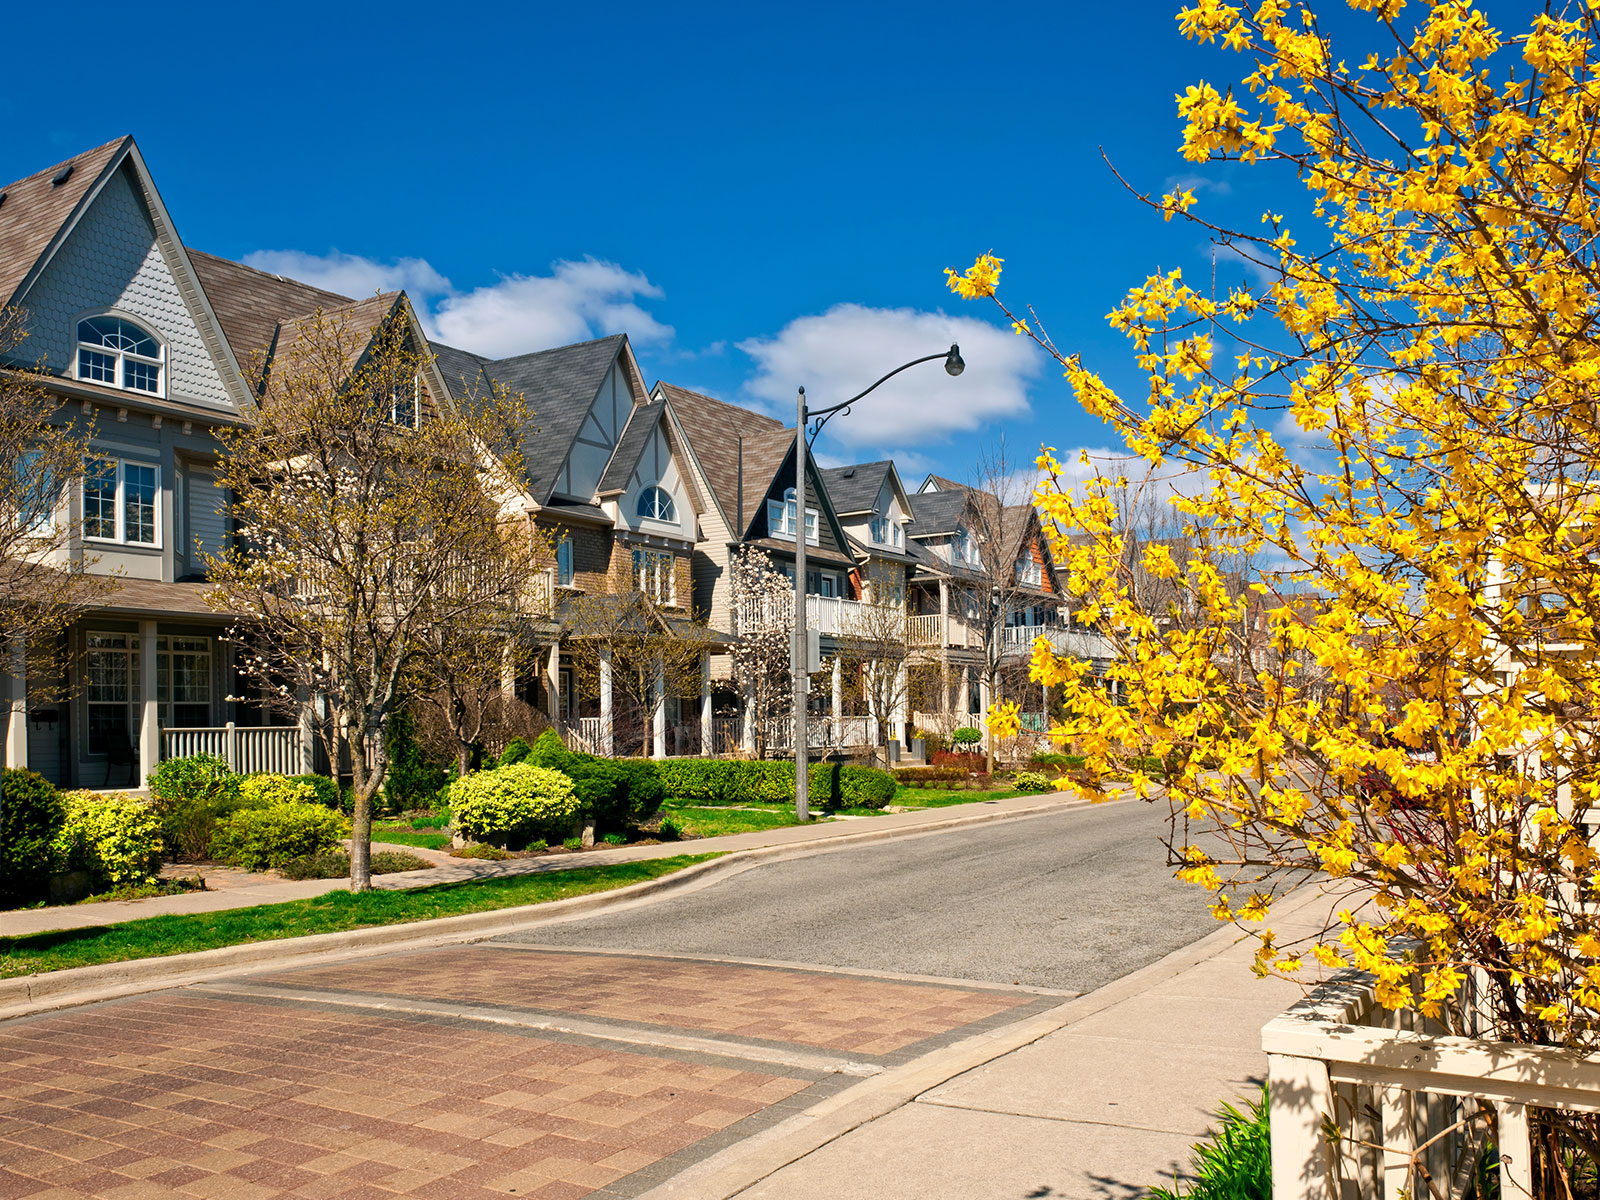 Ontario Real Estate Market: Prices Continue to Rise, but Interest Rates May Slow the Pace